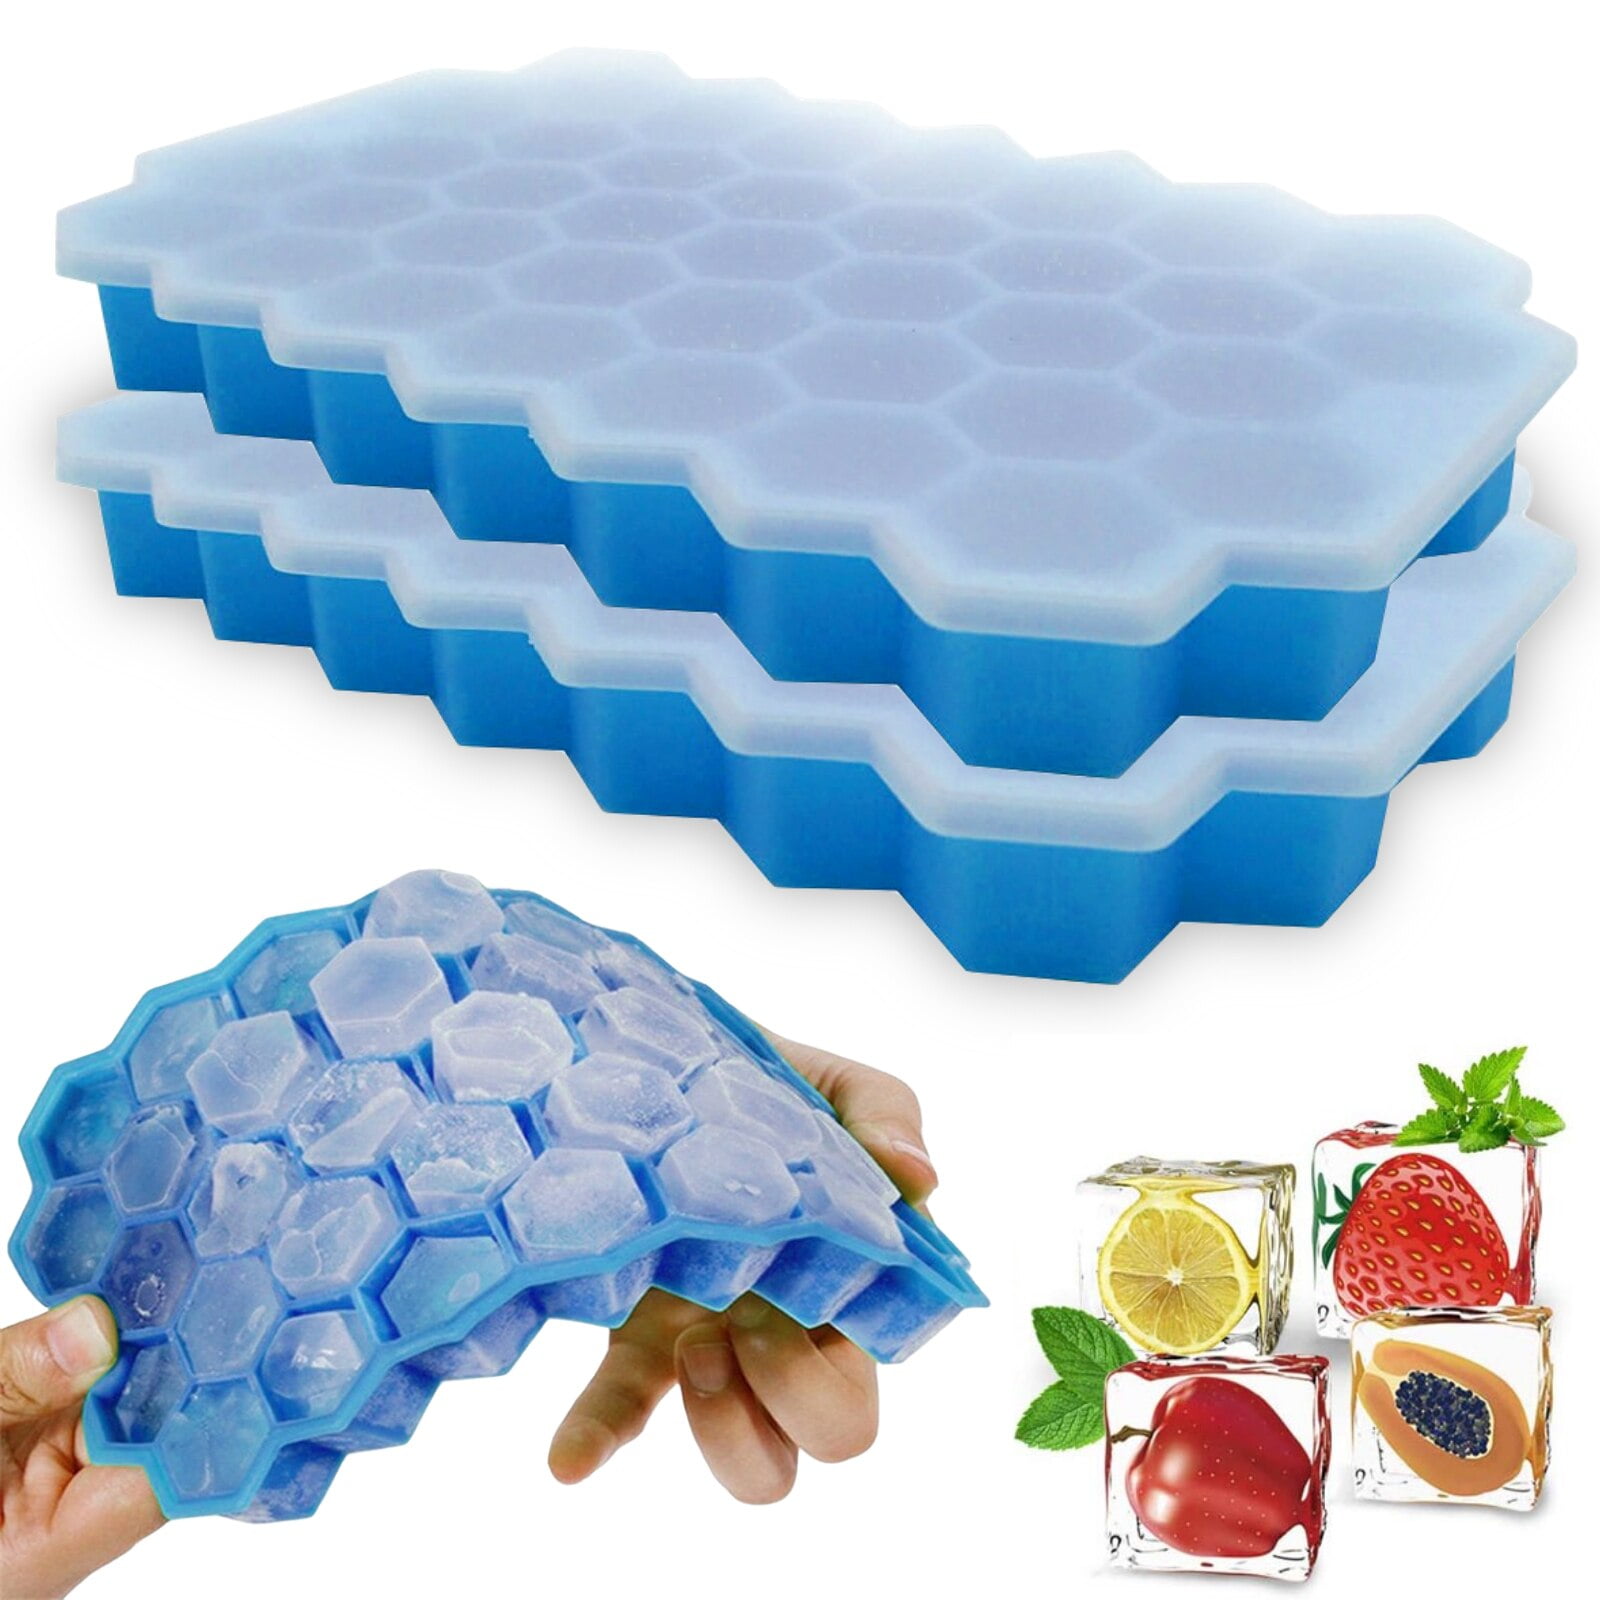 Small Ice Cube Trays with Lid - ZDZDZ Silicone Ice Cube Molds, 2 Pack Easy-Release Tiny Ice Trays - Make 72 Ice Cube,Stackable Ice Mold Set for Iced